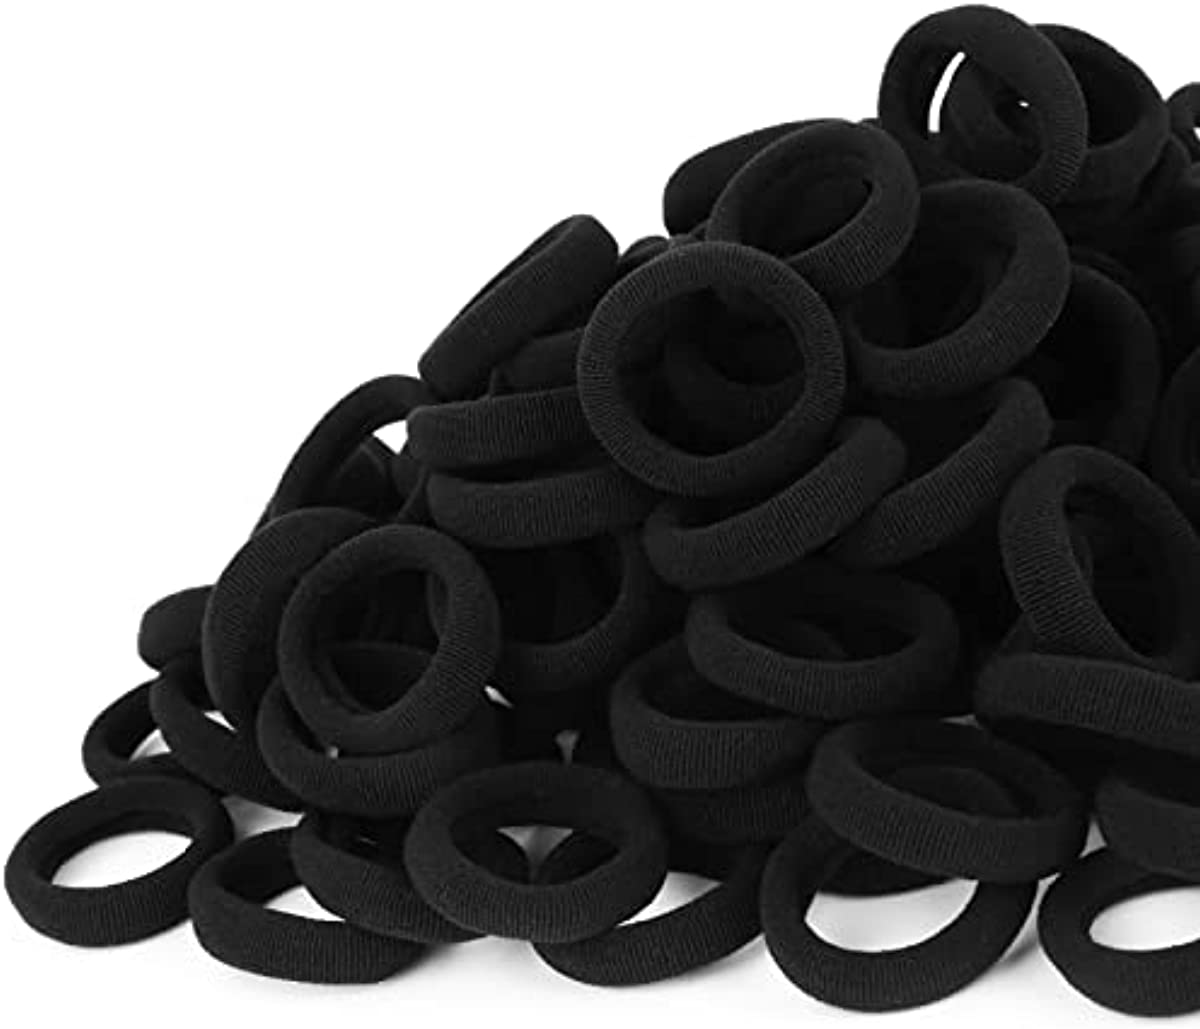 300PCS Black Toddler Kids Hair Ties – Infant Cotton Hair Ponytail Holders Baby Hair Bands – Kids Seamless Elastic Hair Bands, Soft and No Damage, 1.1 Inch in Diameter, 15 Colors, by Qarwayoc